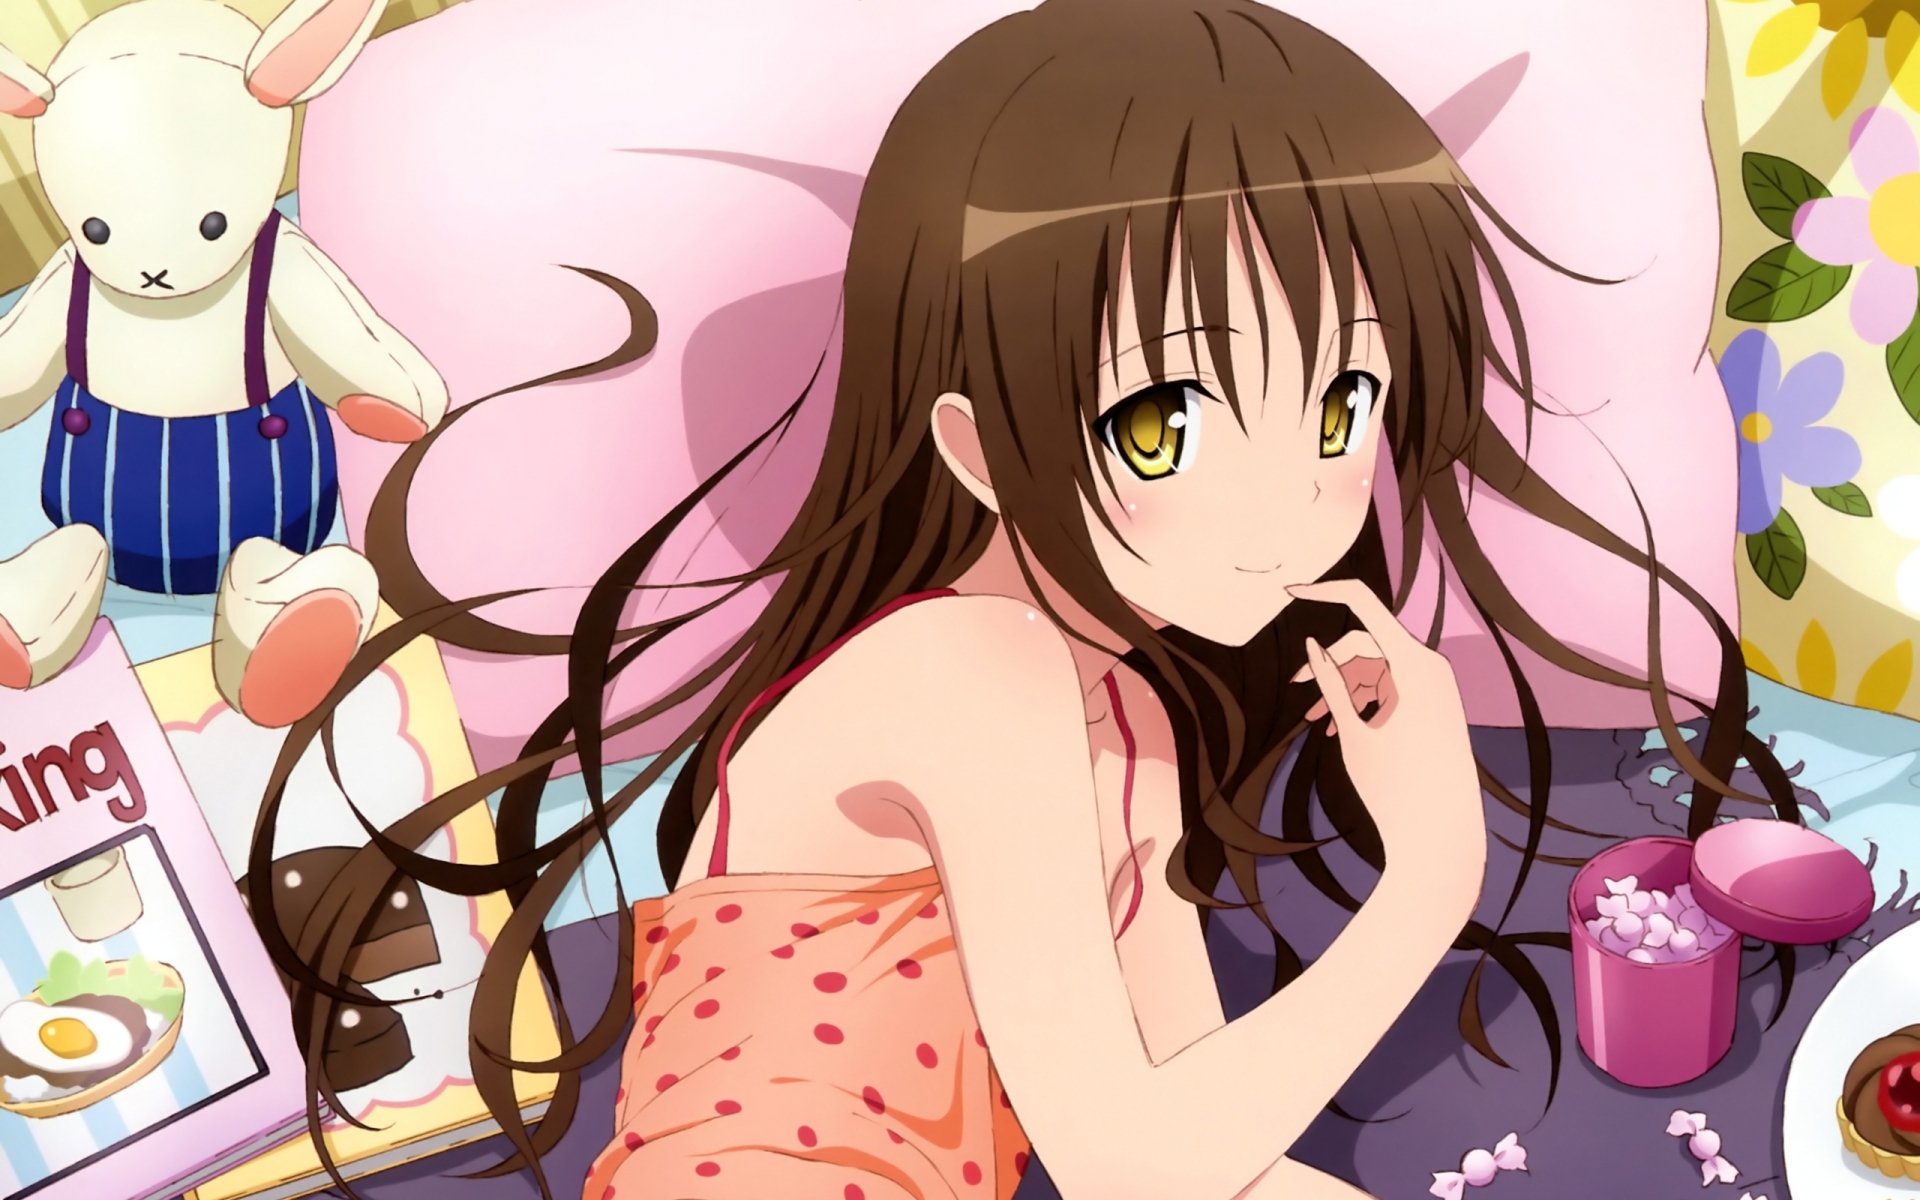 8. Mikan Yuuki from To Love-Ru - wide 7